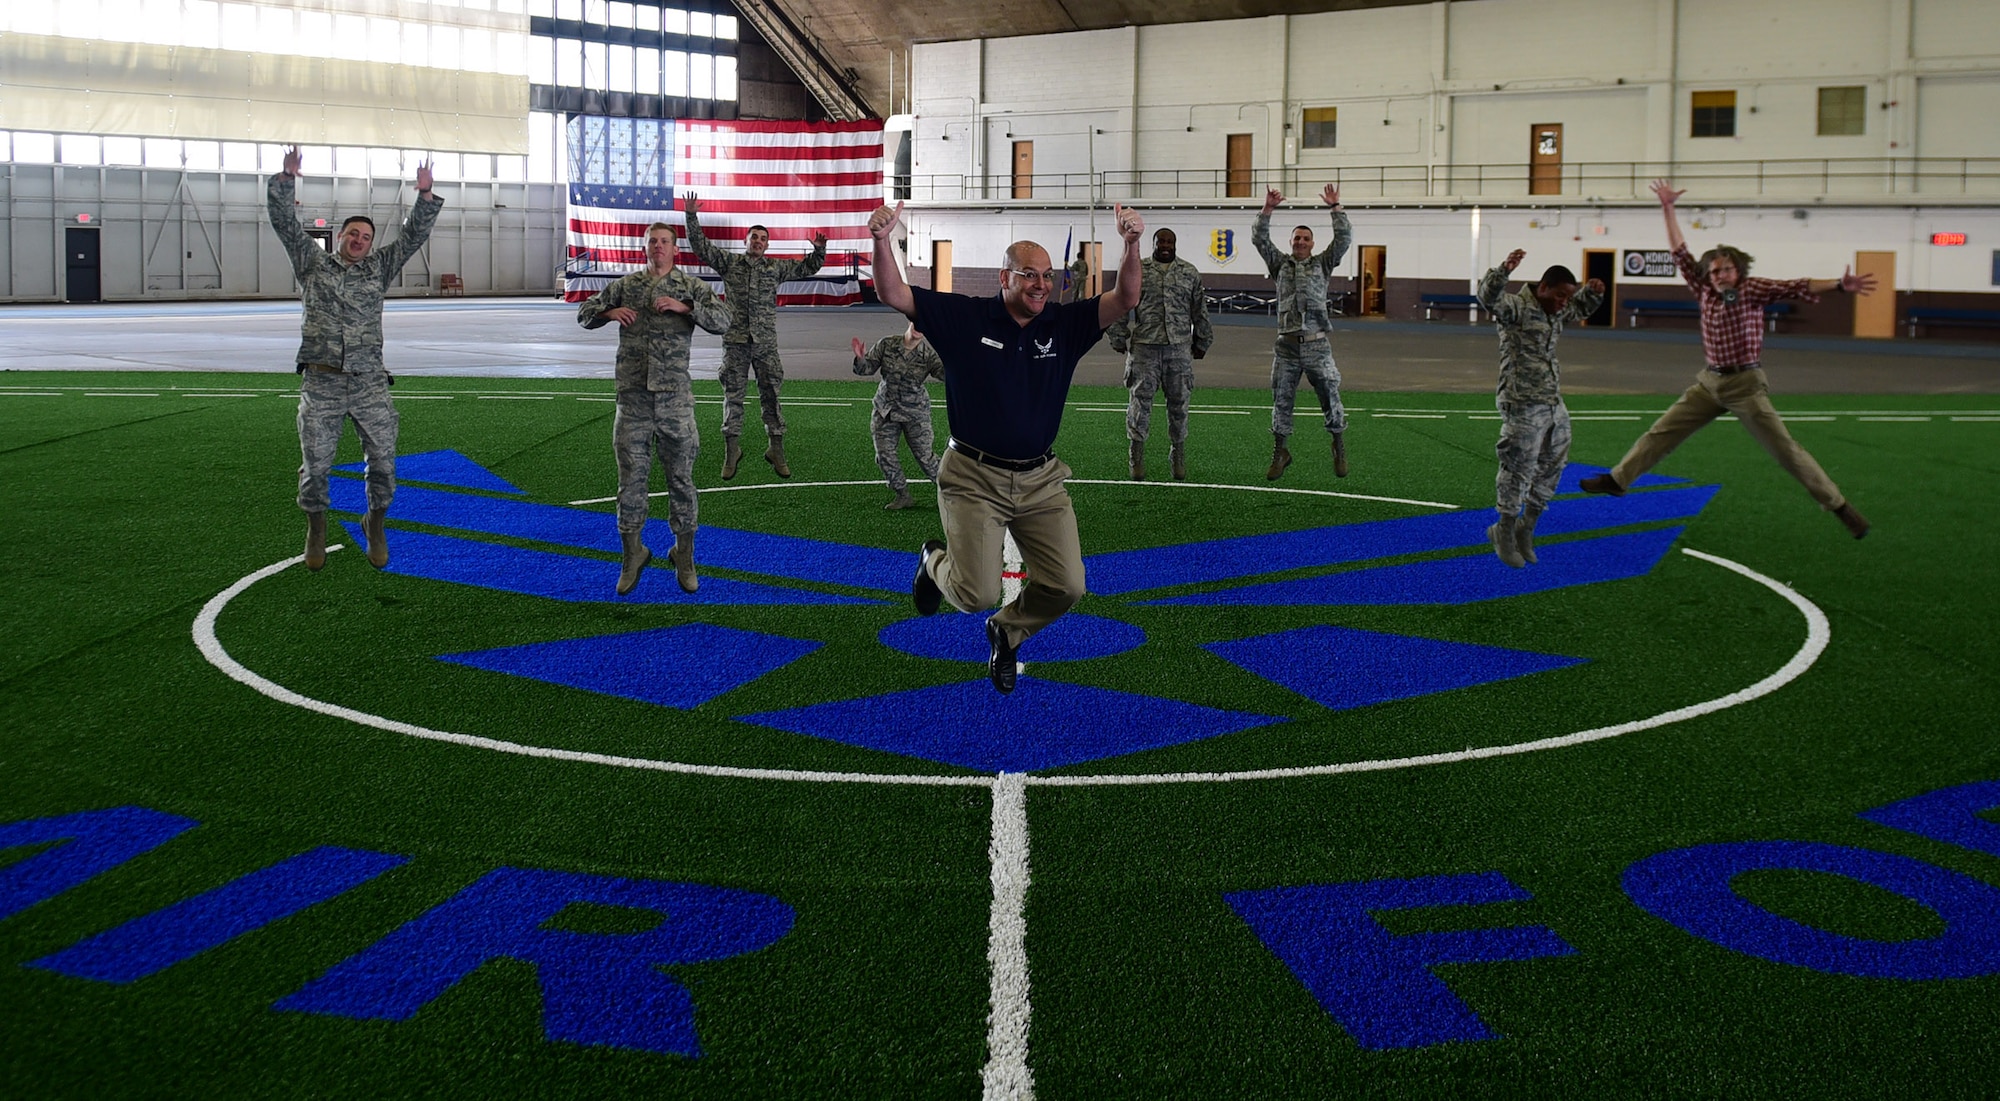 Members from the 28th Civil Engineer Squadron, 28th Contracting Squadron and 28th Force Support Squadron jump for joy inside the Pride Hangar at Ellsworth Air Force Base S.D., Nov. 21, 2016. Over the past month, members of the three squadrons completed a $249,000 renovation project and the facility is ready for use. (U.S. Air Force photo by Airman 1st Class James L. Miller)